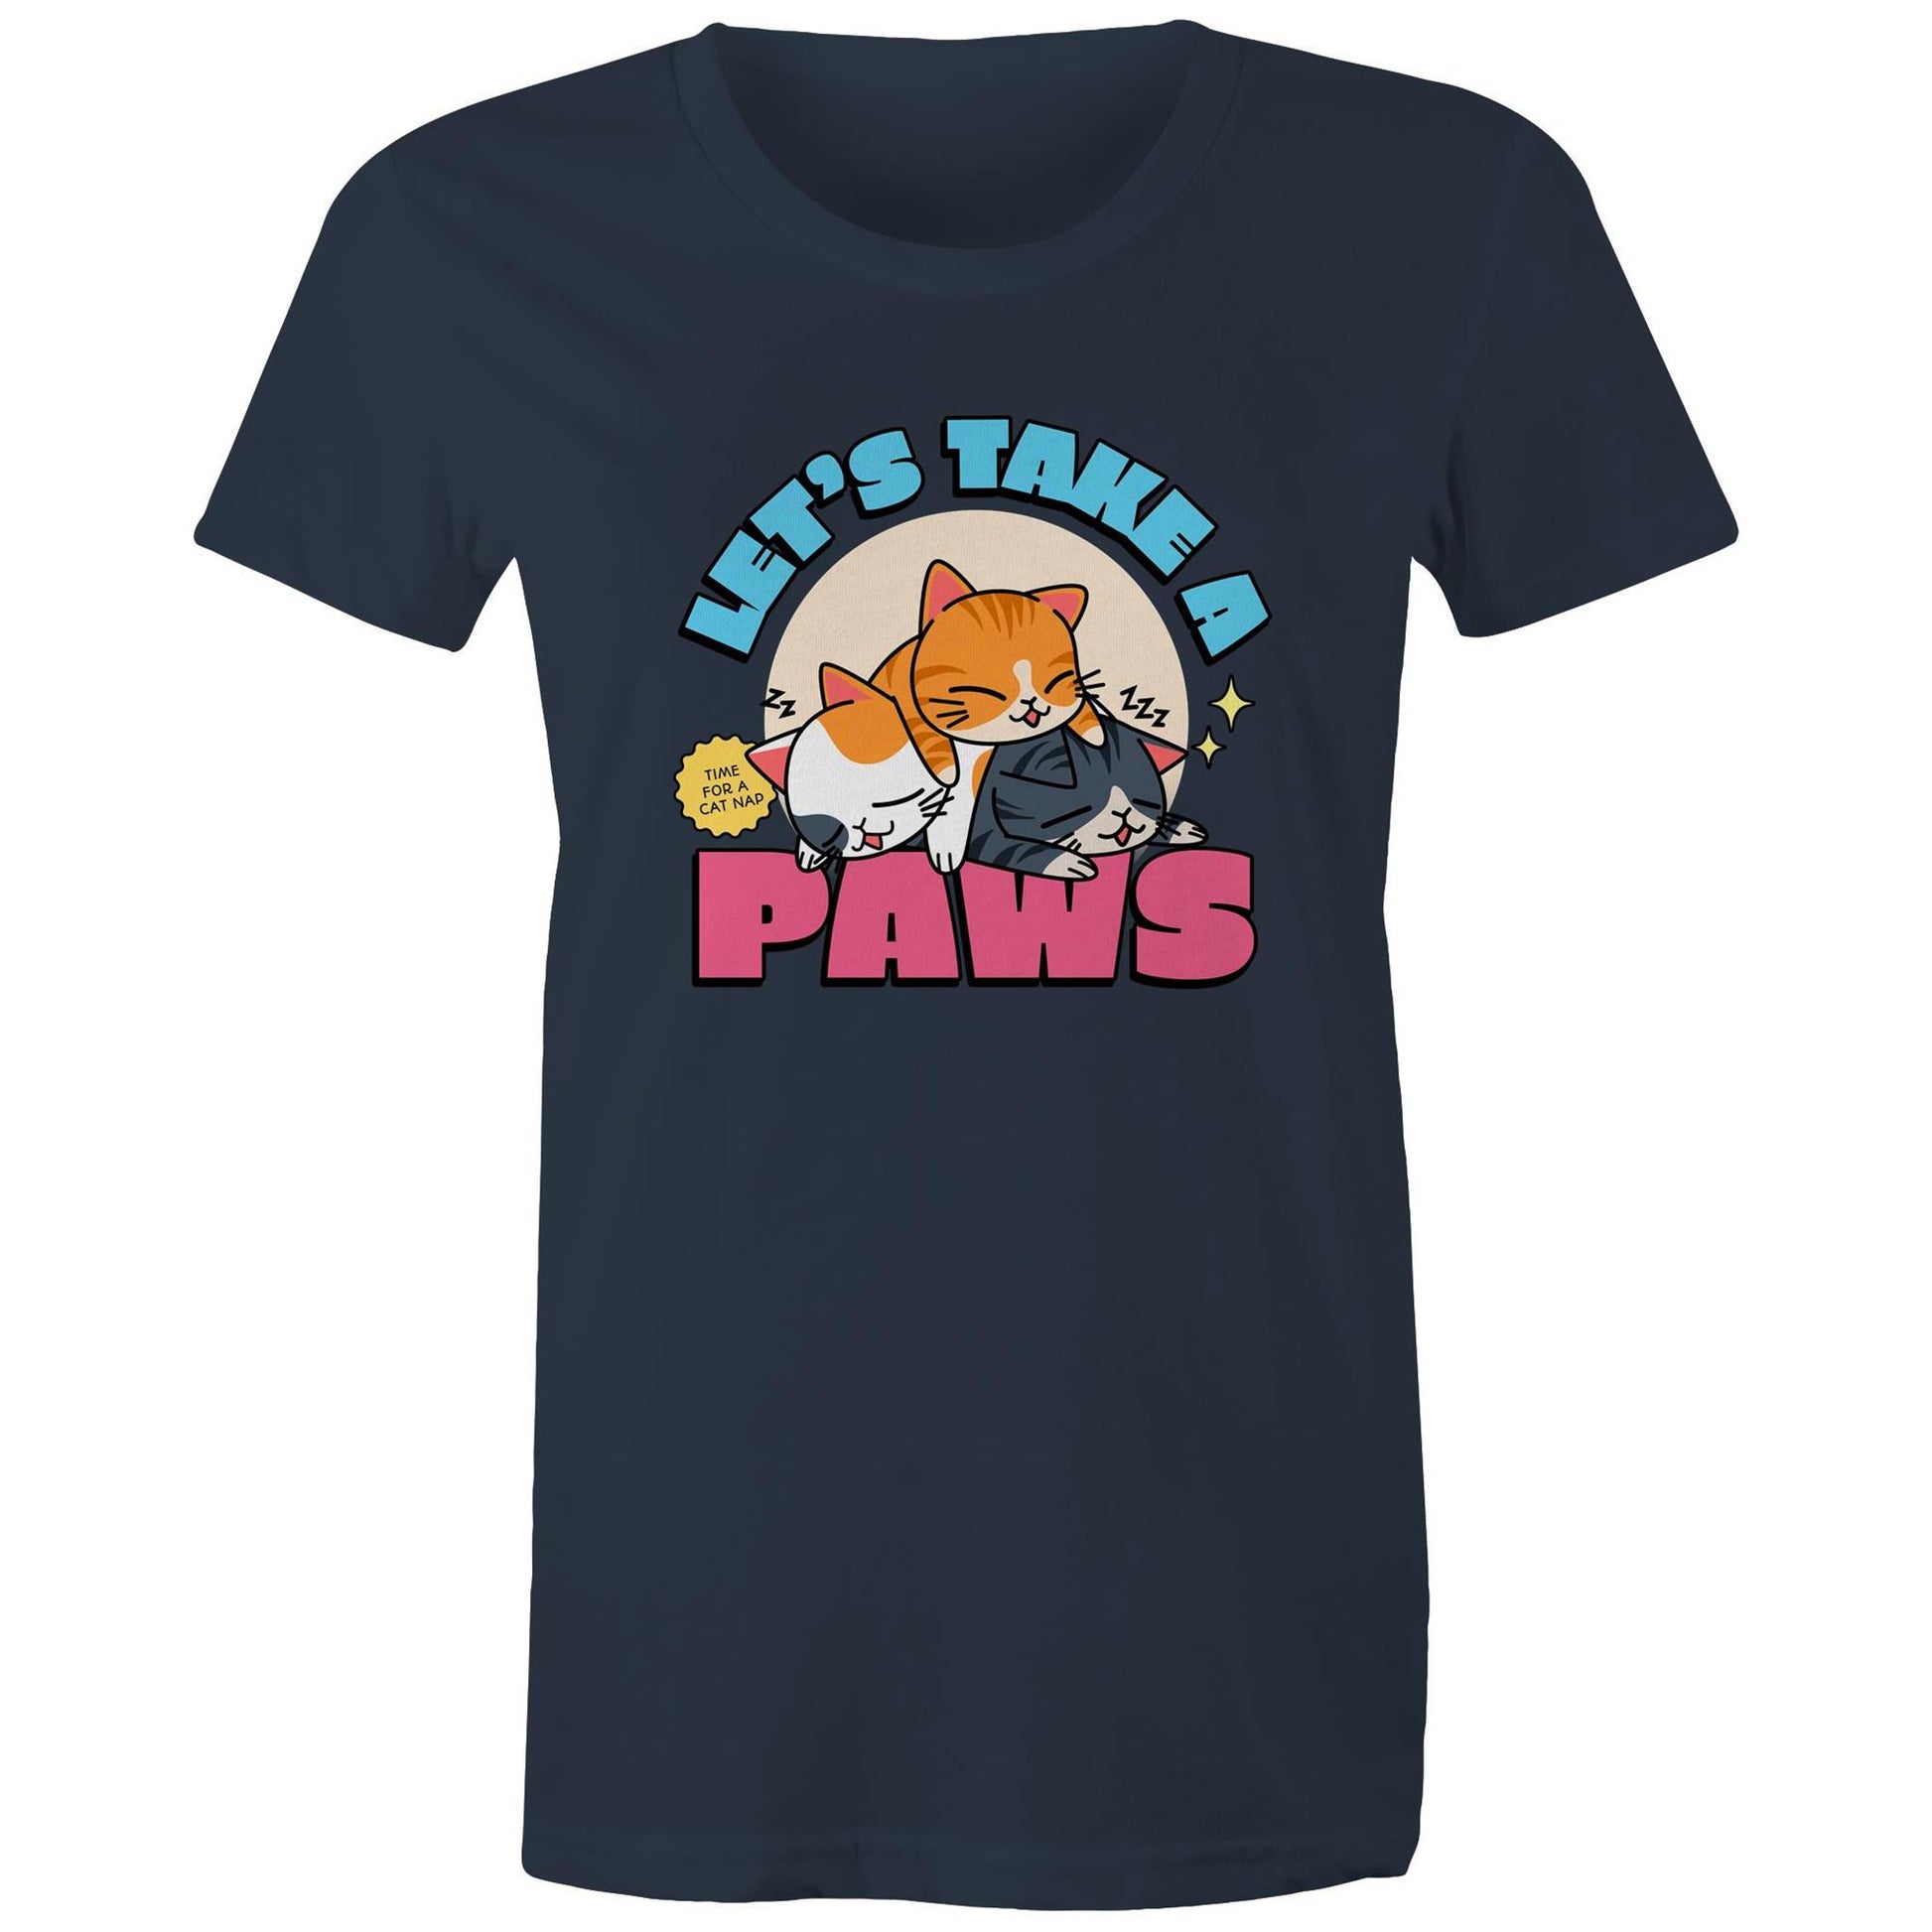 Let's Take A Paws, Time For A Cat Nap - Womens T-shirt Navy Womens T-shirt animal